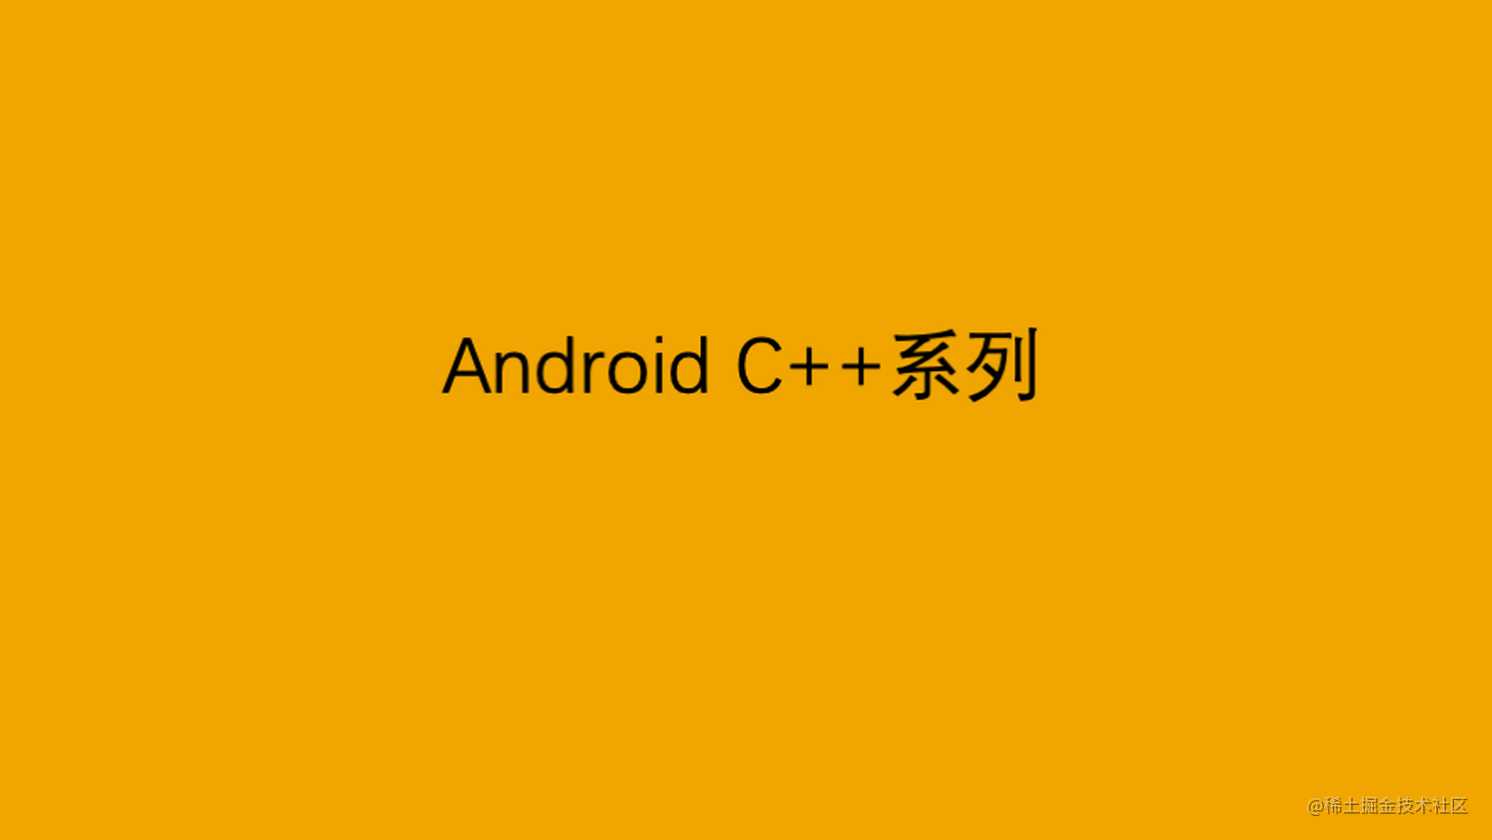 Android C++系列：string最佳实践